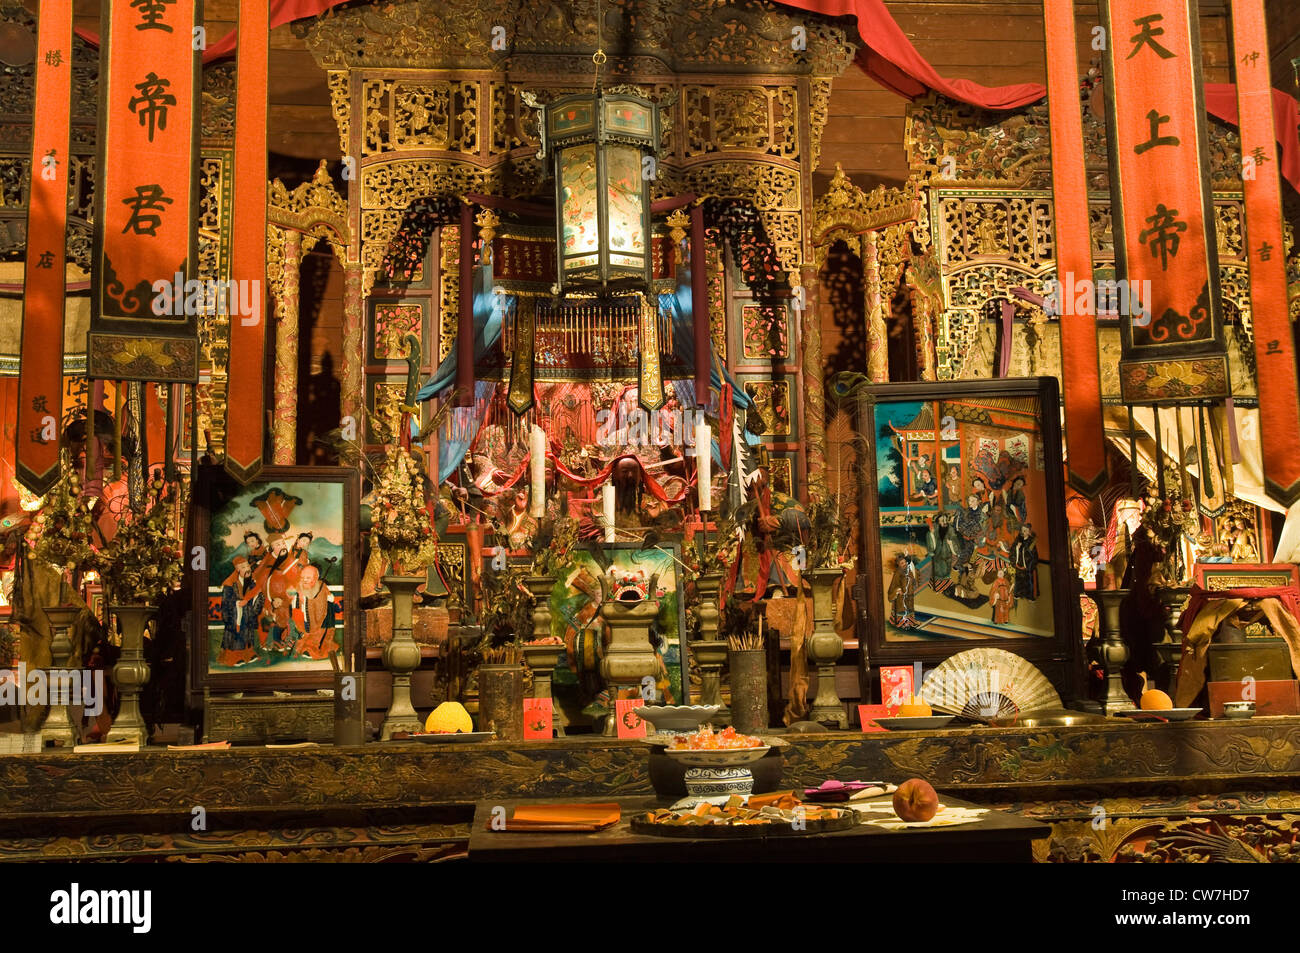 Joss House, oldest continuously used Chinese temple of Chinese immigrants, USA, California Stock Photo